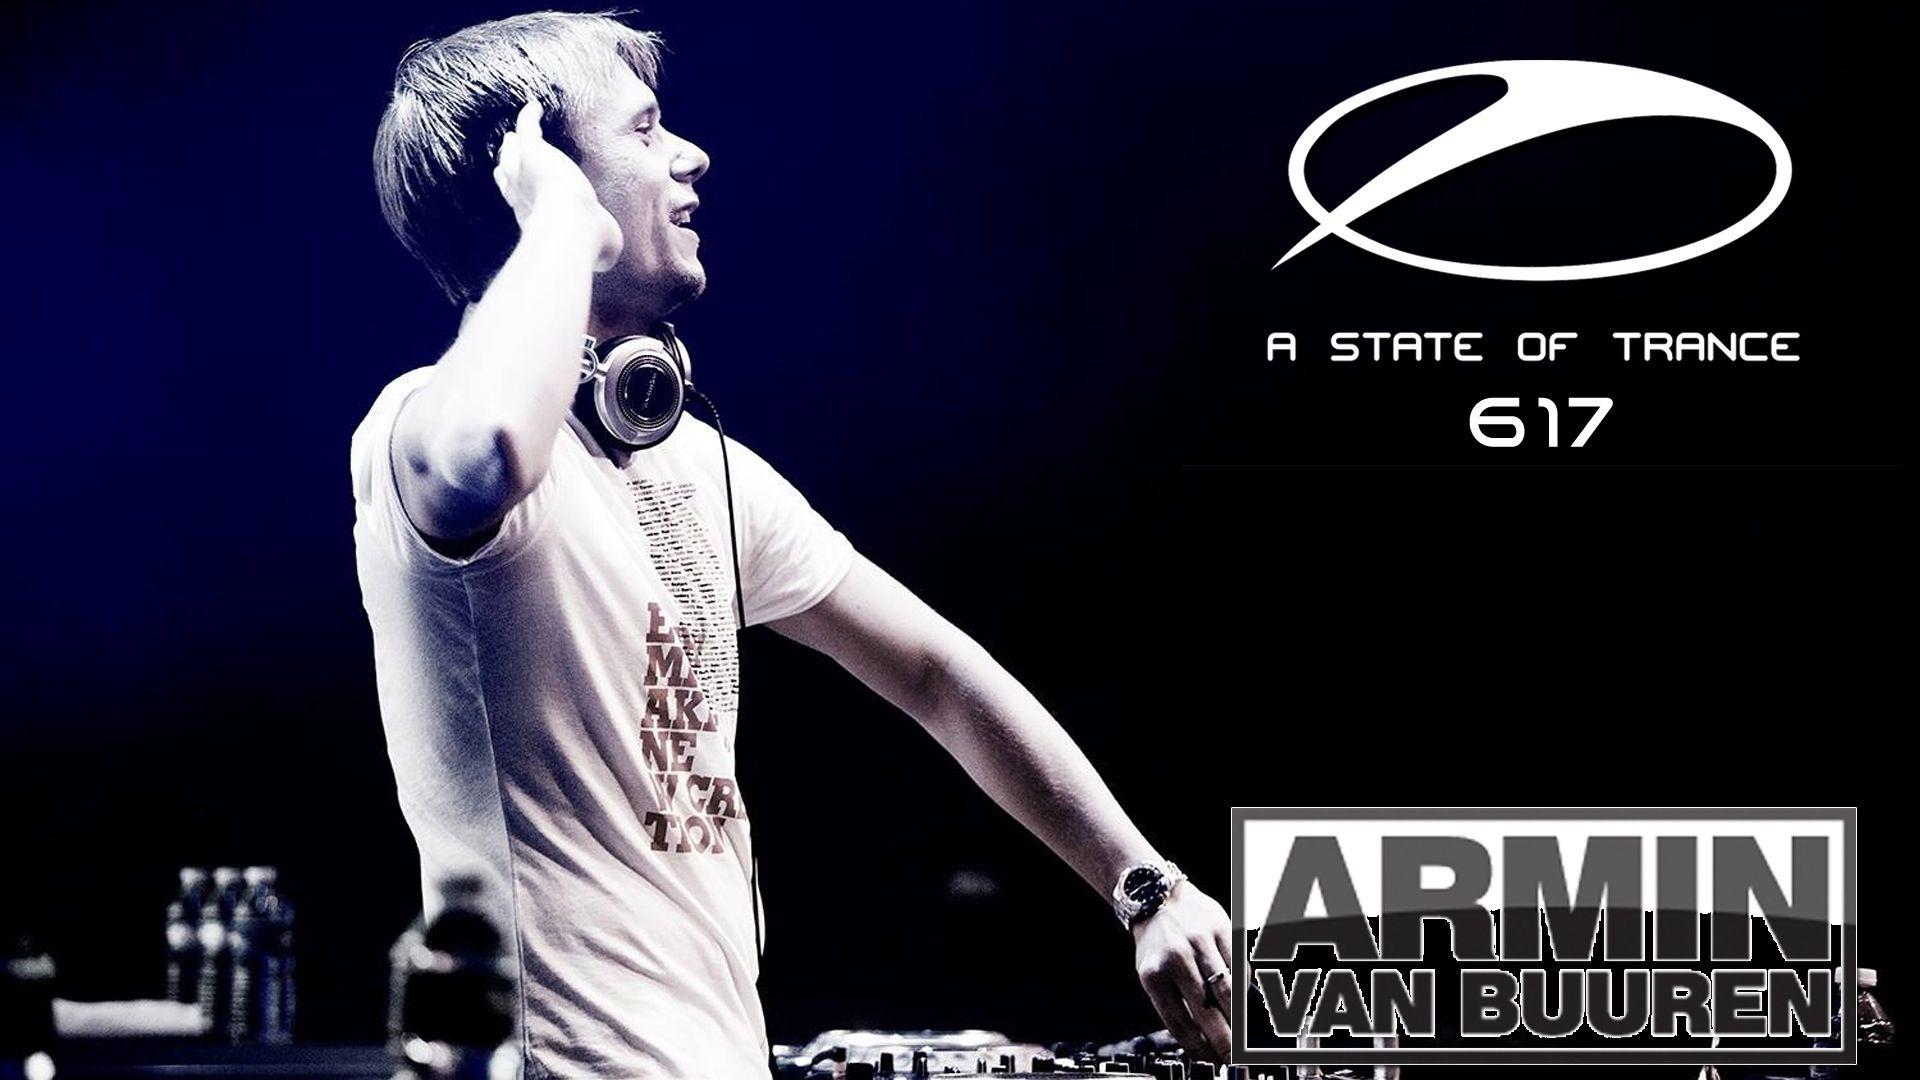 A State Of Trance 617 (13.06.2013) with Armin van Buuren